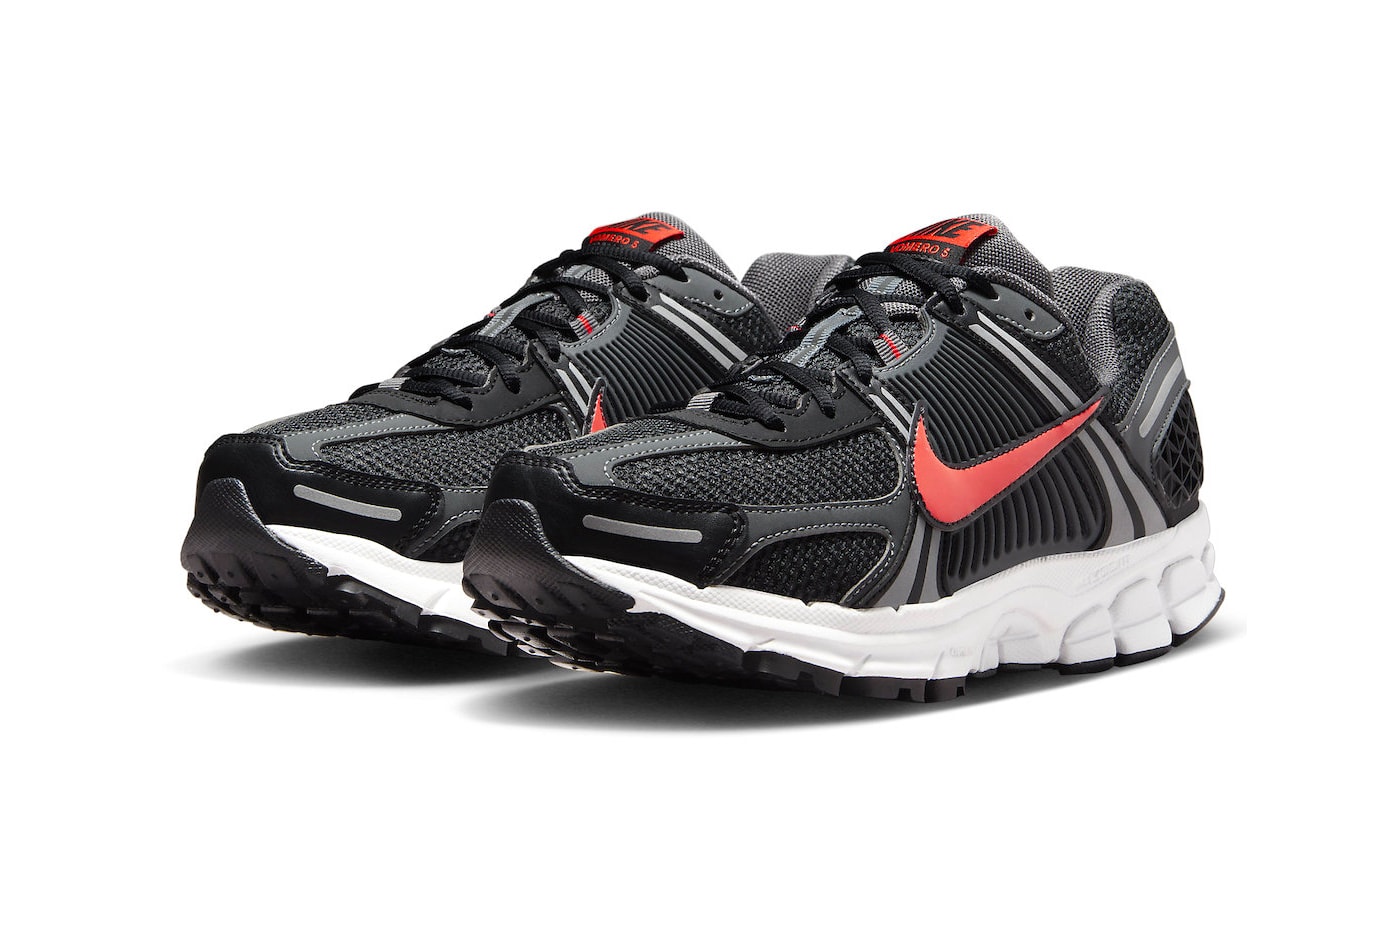 Nike Zoom Vomero 5 Lands in "Black/Picante Red" FB9149-001 Black/Picante Red-Iron Grey-Summit White